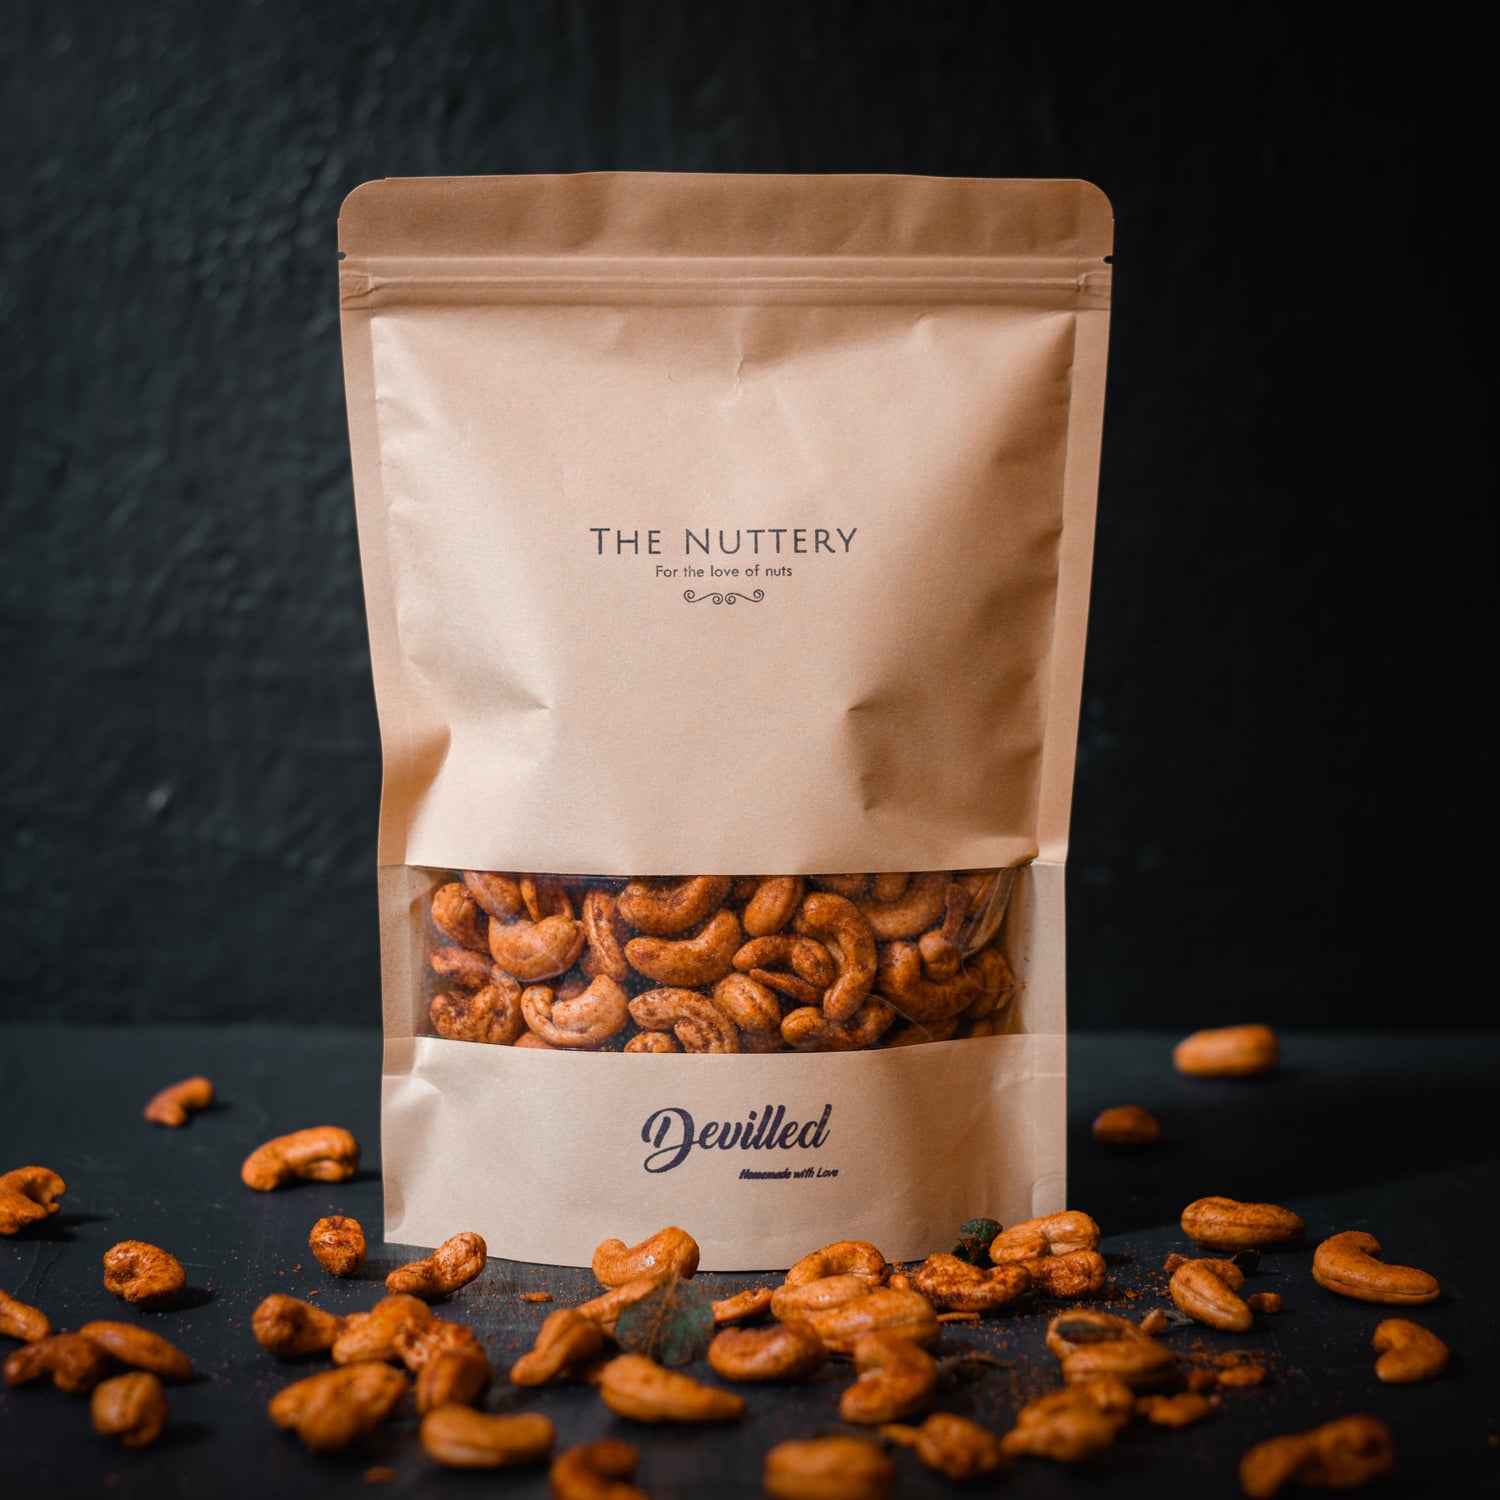 Devilled Cashews - The Nuttery